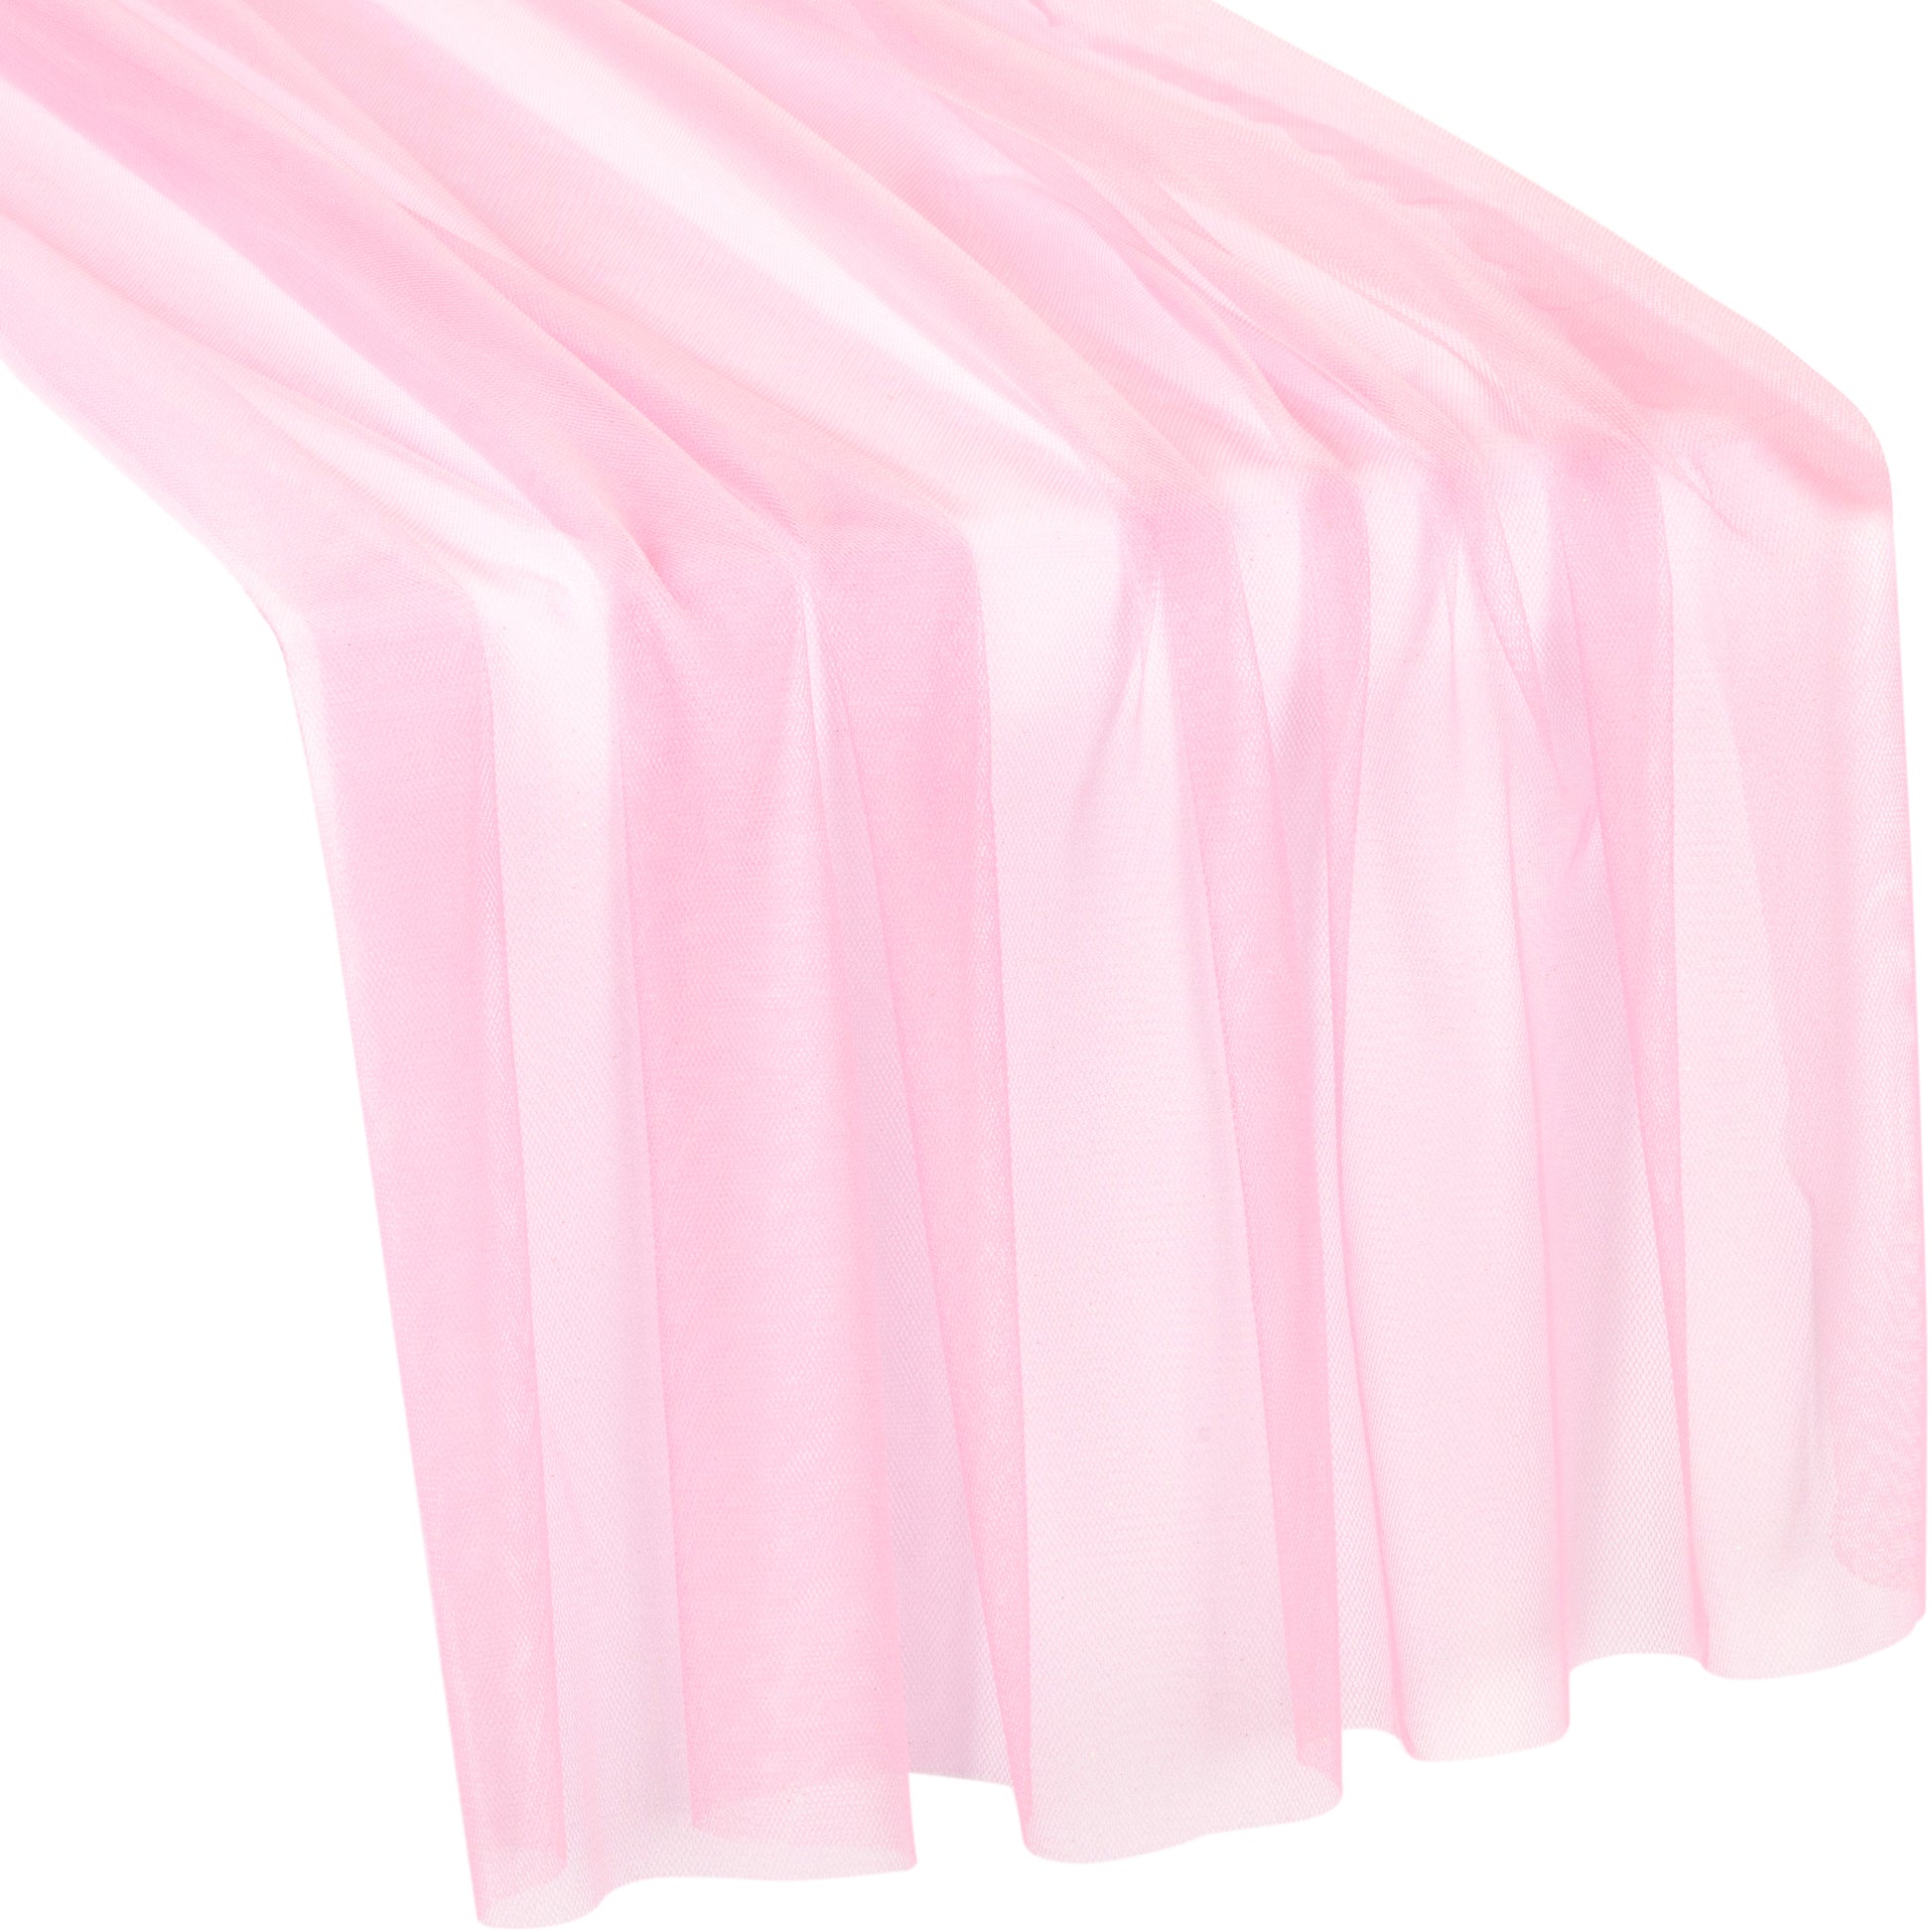 Soft Tulle Table Runner Extra Long 30" x 16ft - Pink